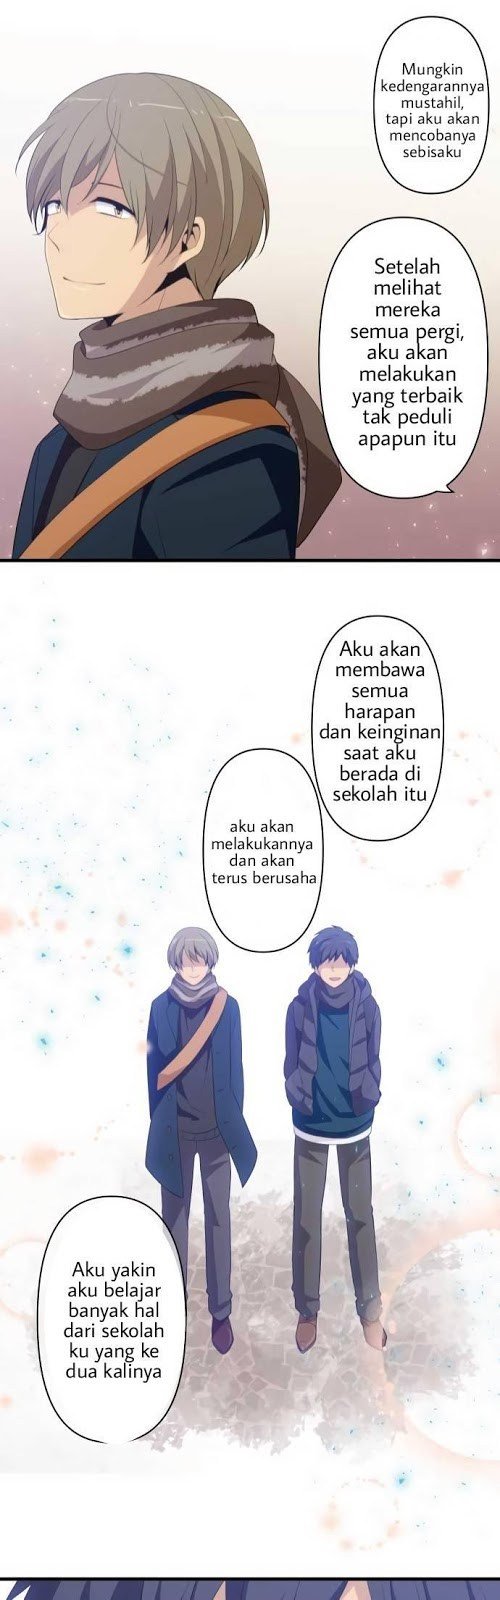 ReLife Chapter 207